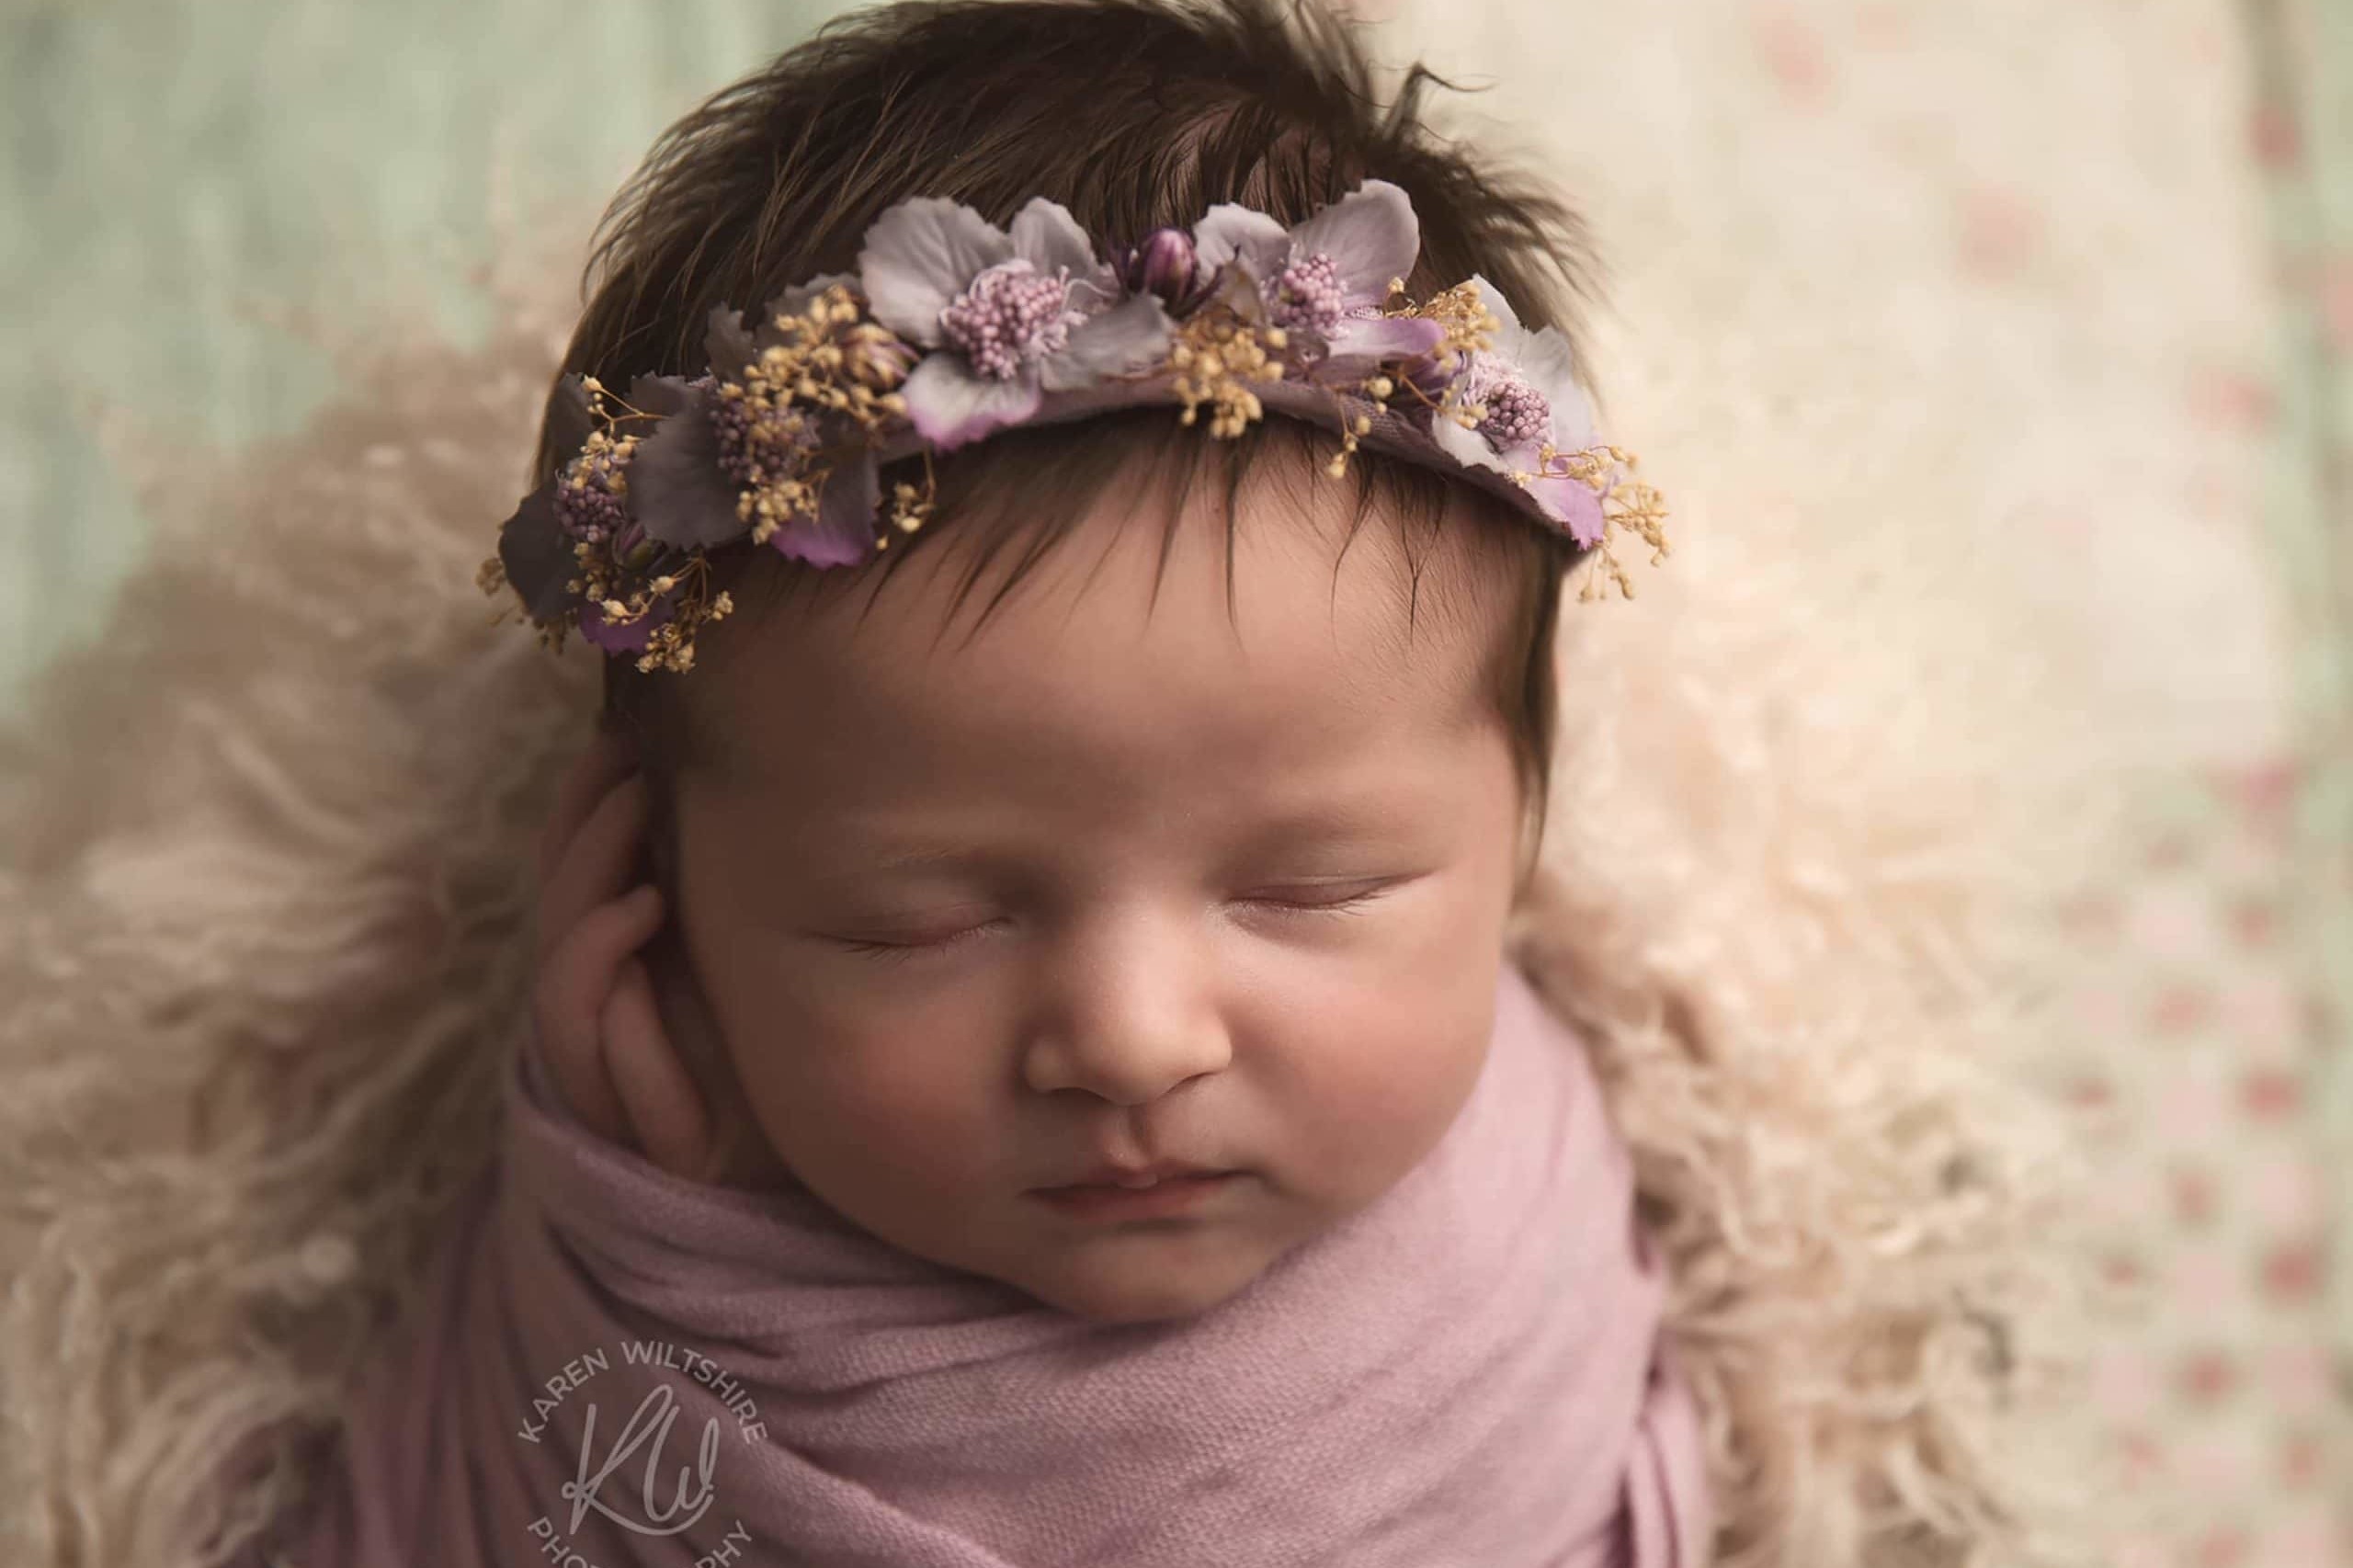 Newborn baby with lots of hair wearing a flower crown